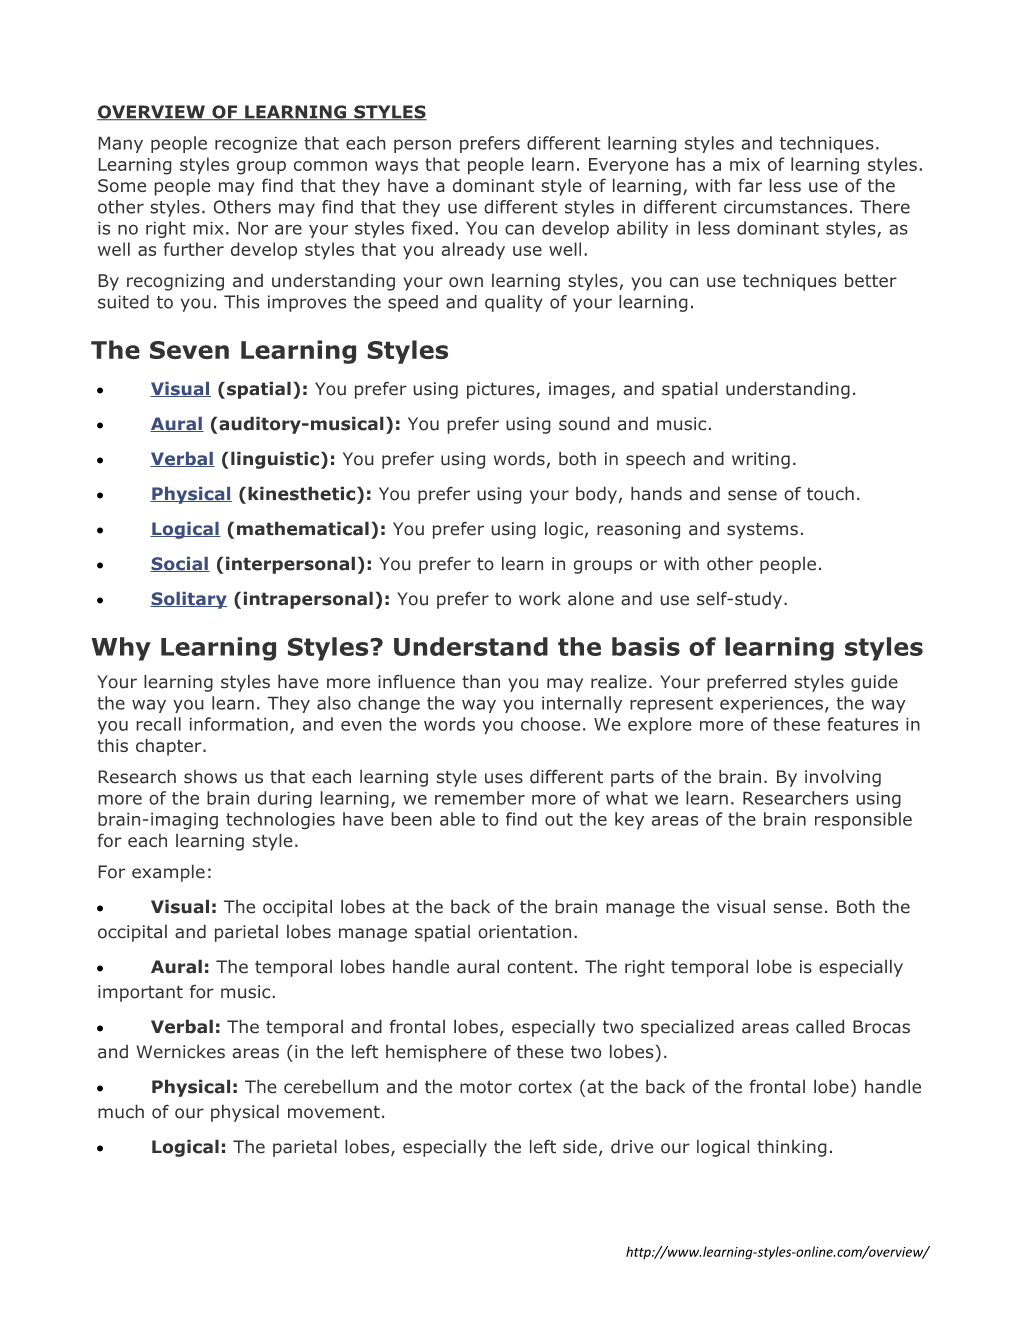 Overview of Learning Styles